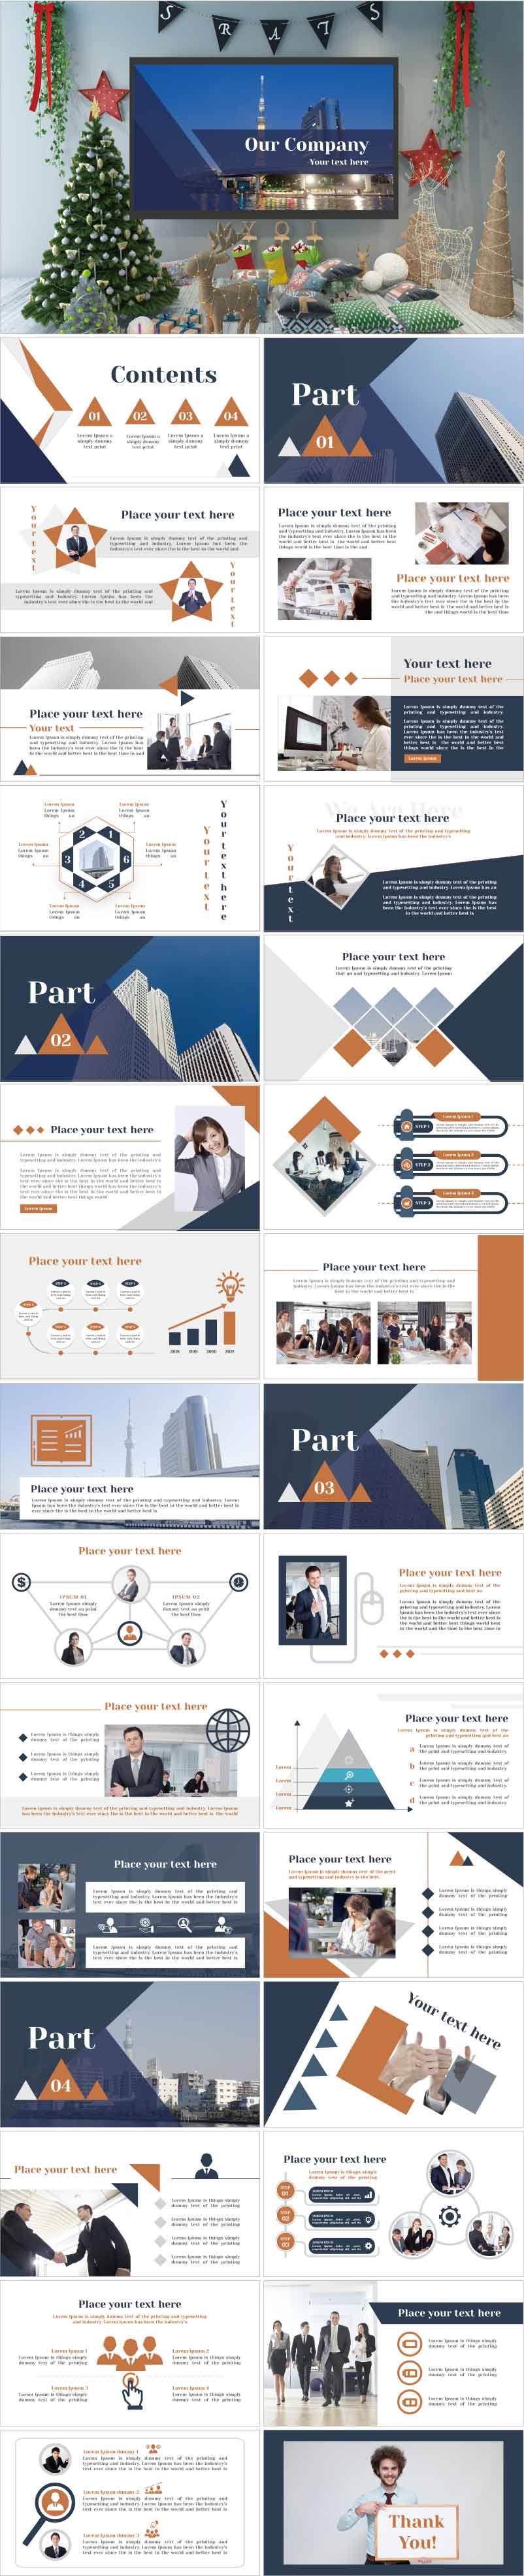 PowerPoint template vol.50